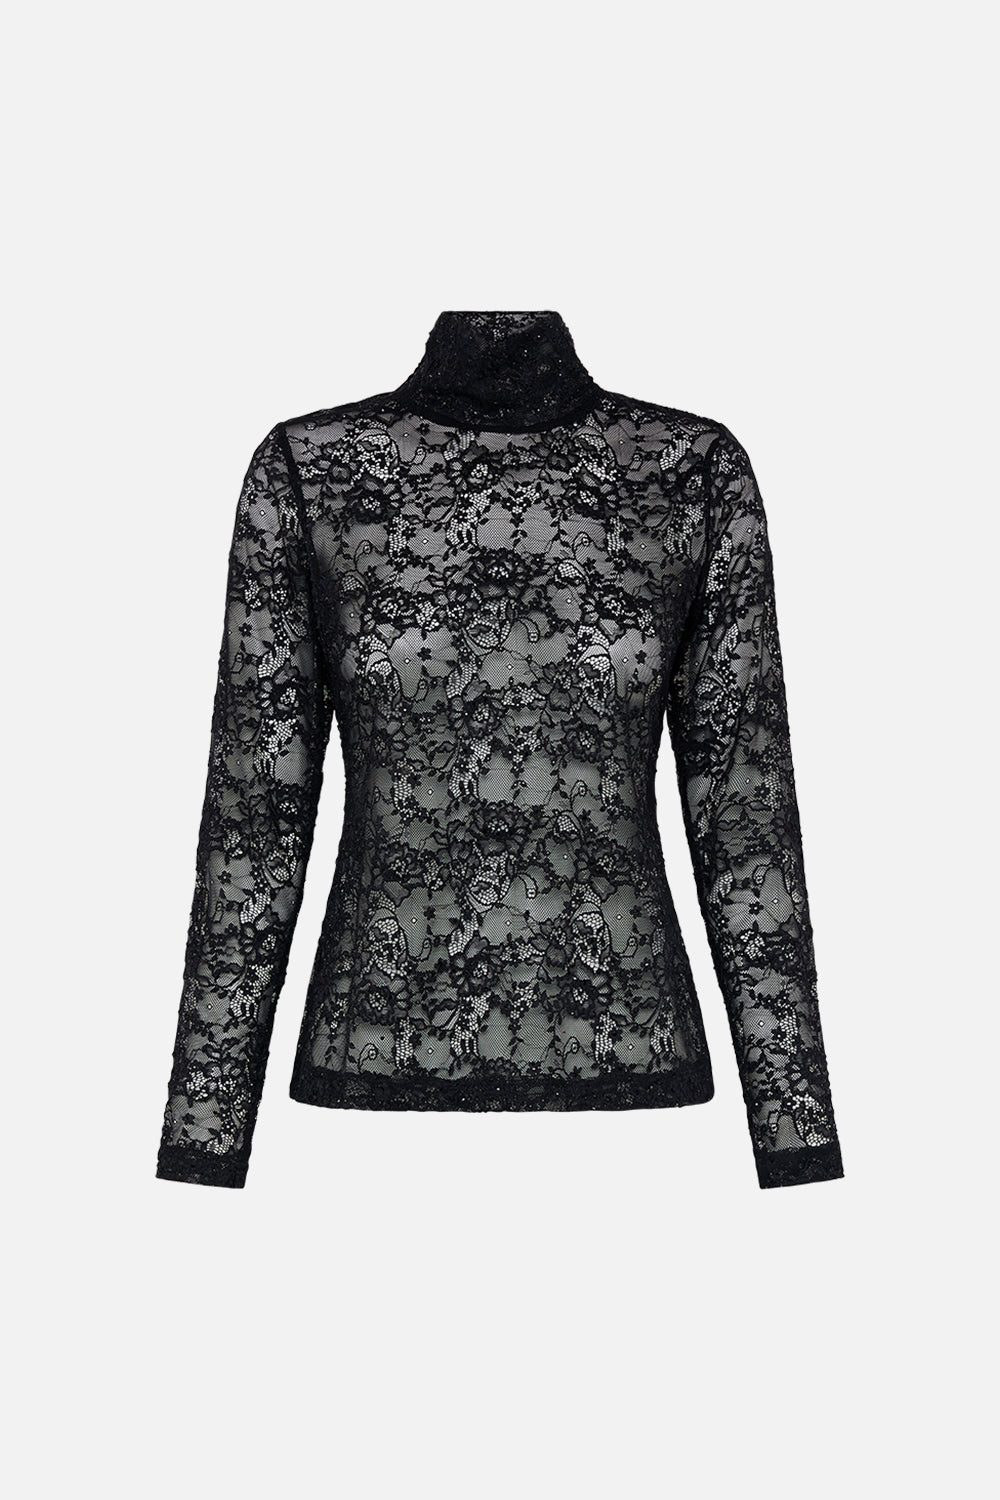 CAMILLA lace turtleneck in Reservation For Love print 